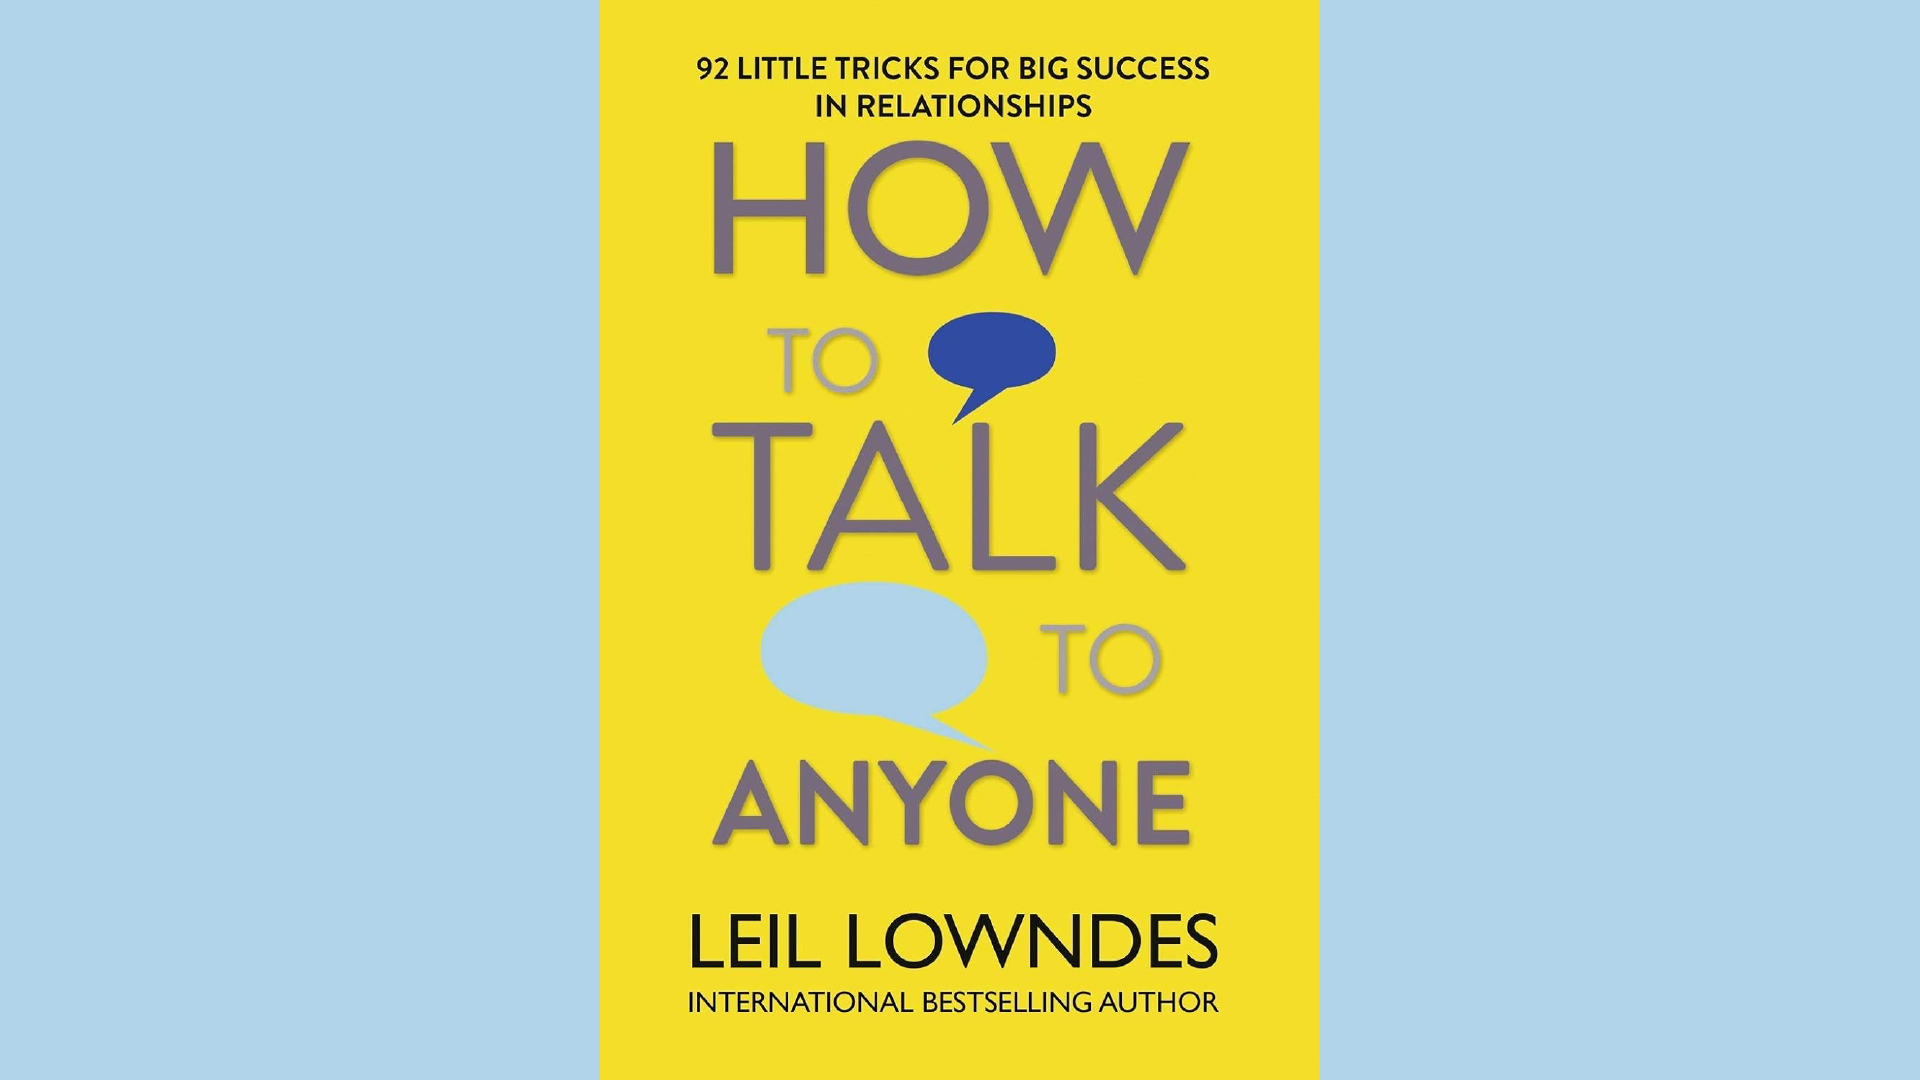 Summary: How to Talk to Anyone by Leil Lowndes